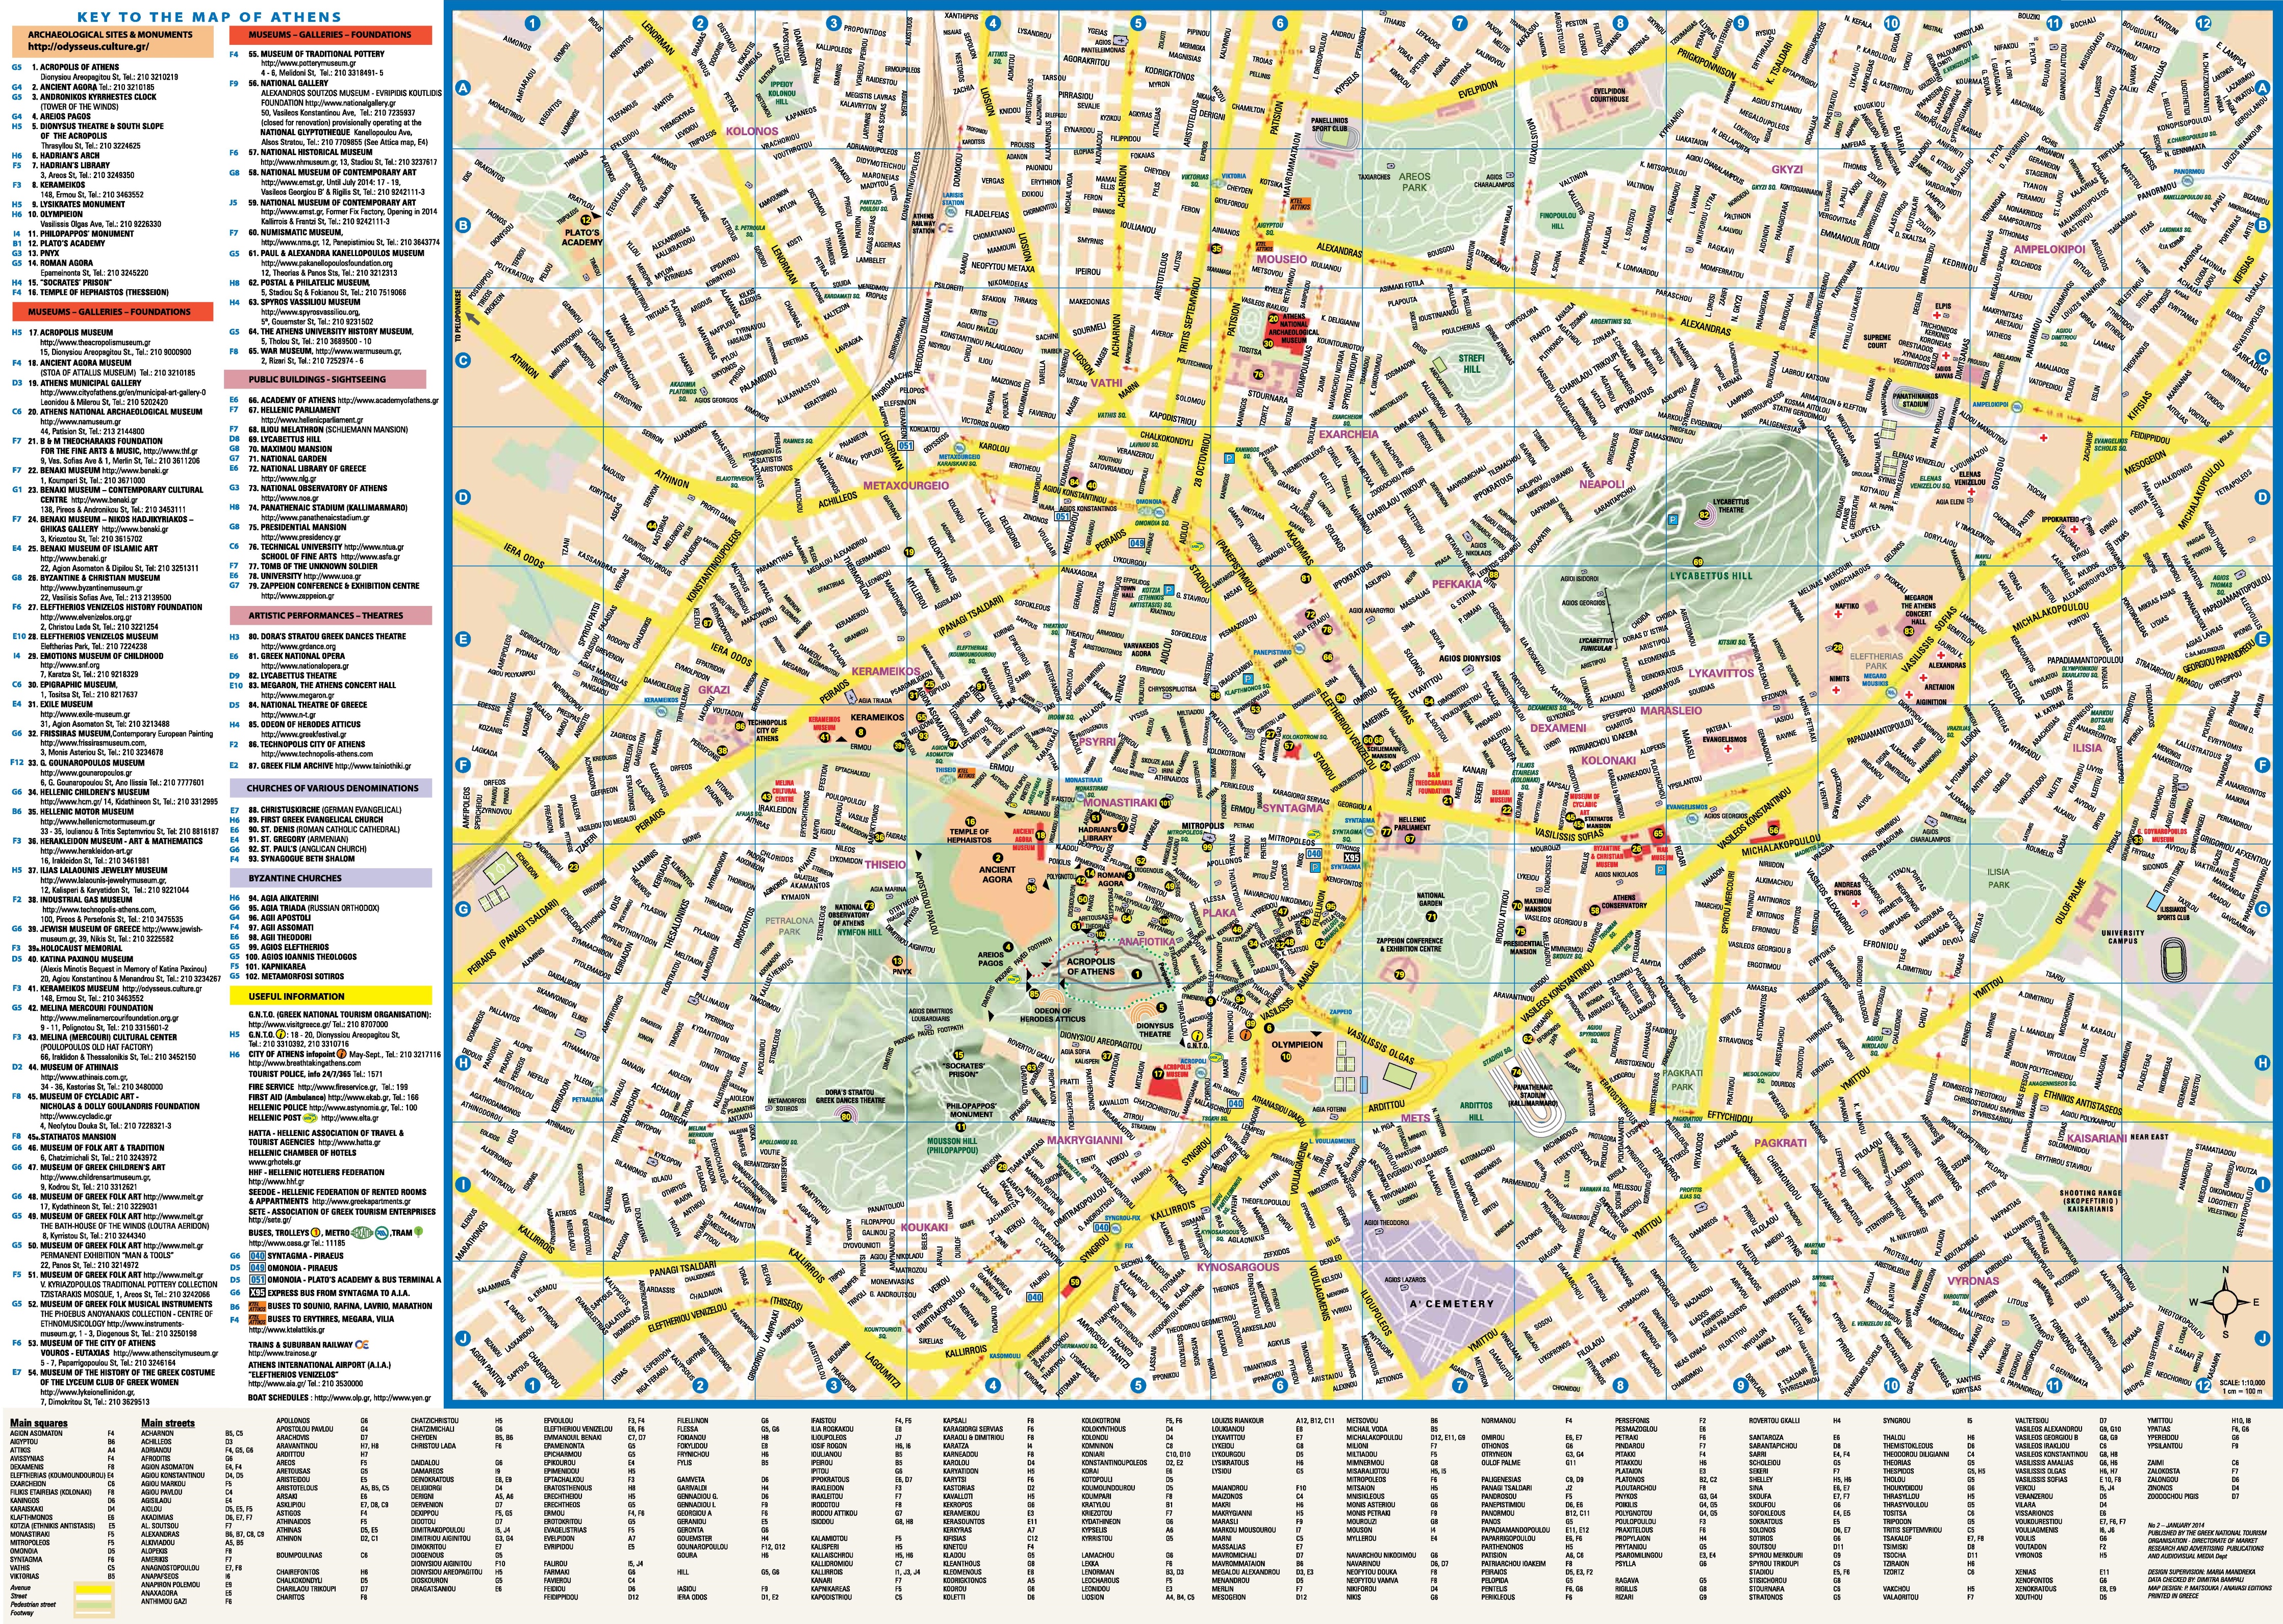 Athens Tourist Attractions Map